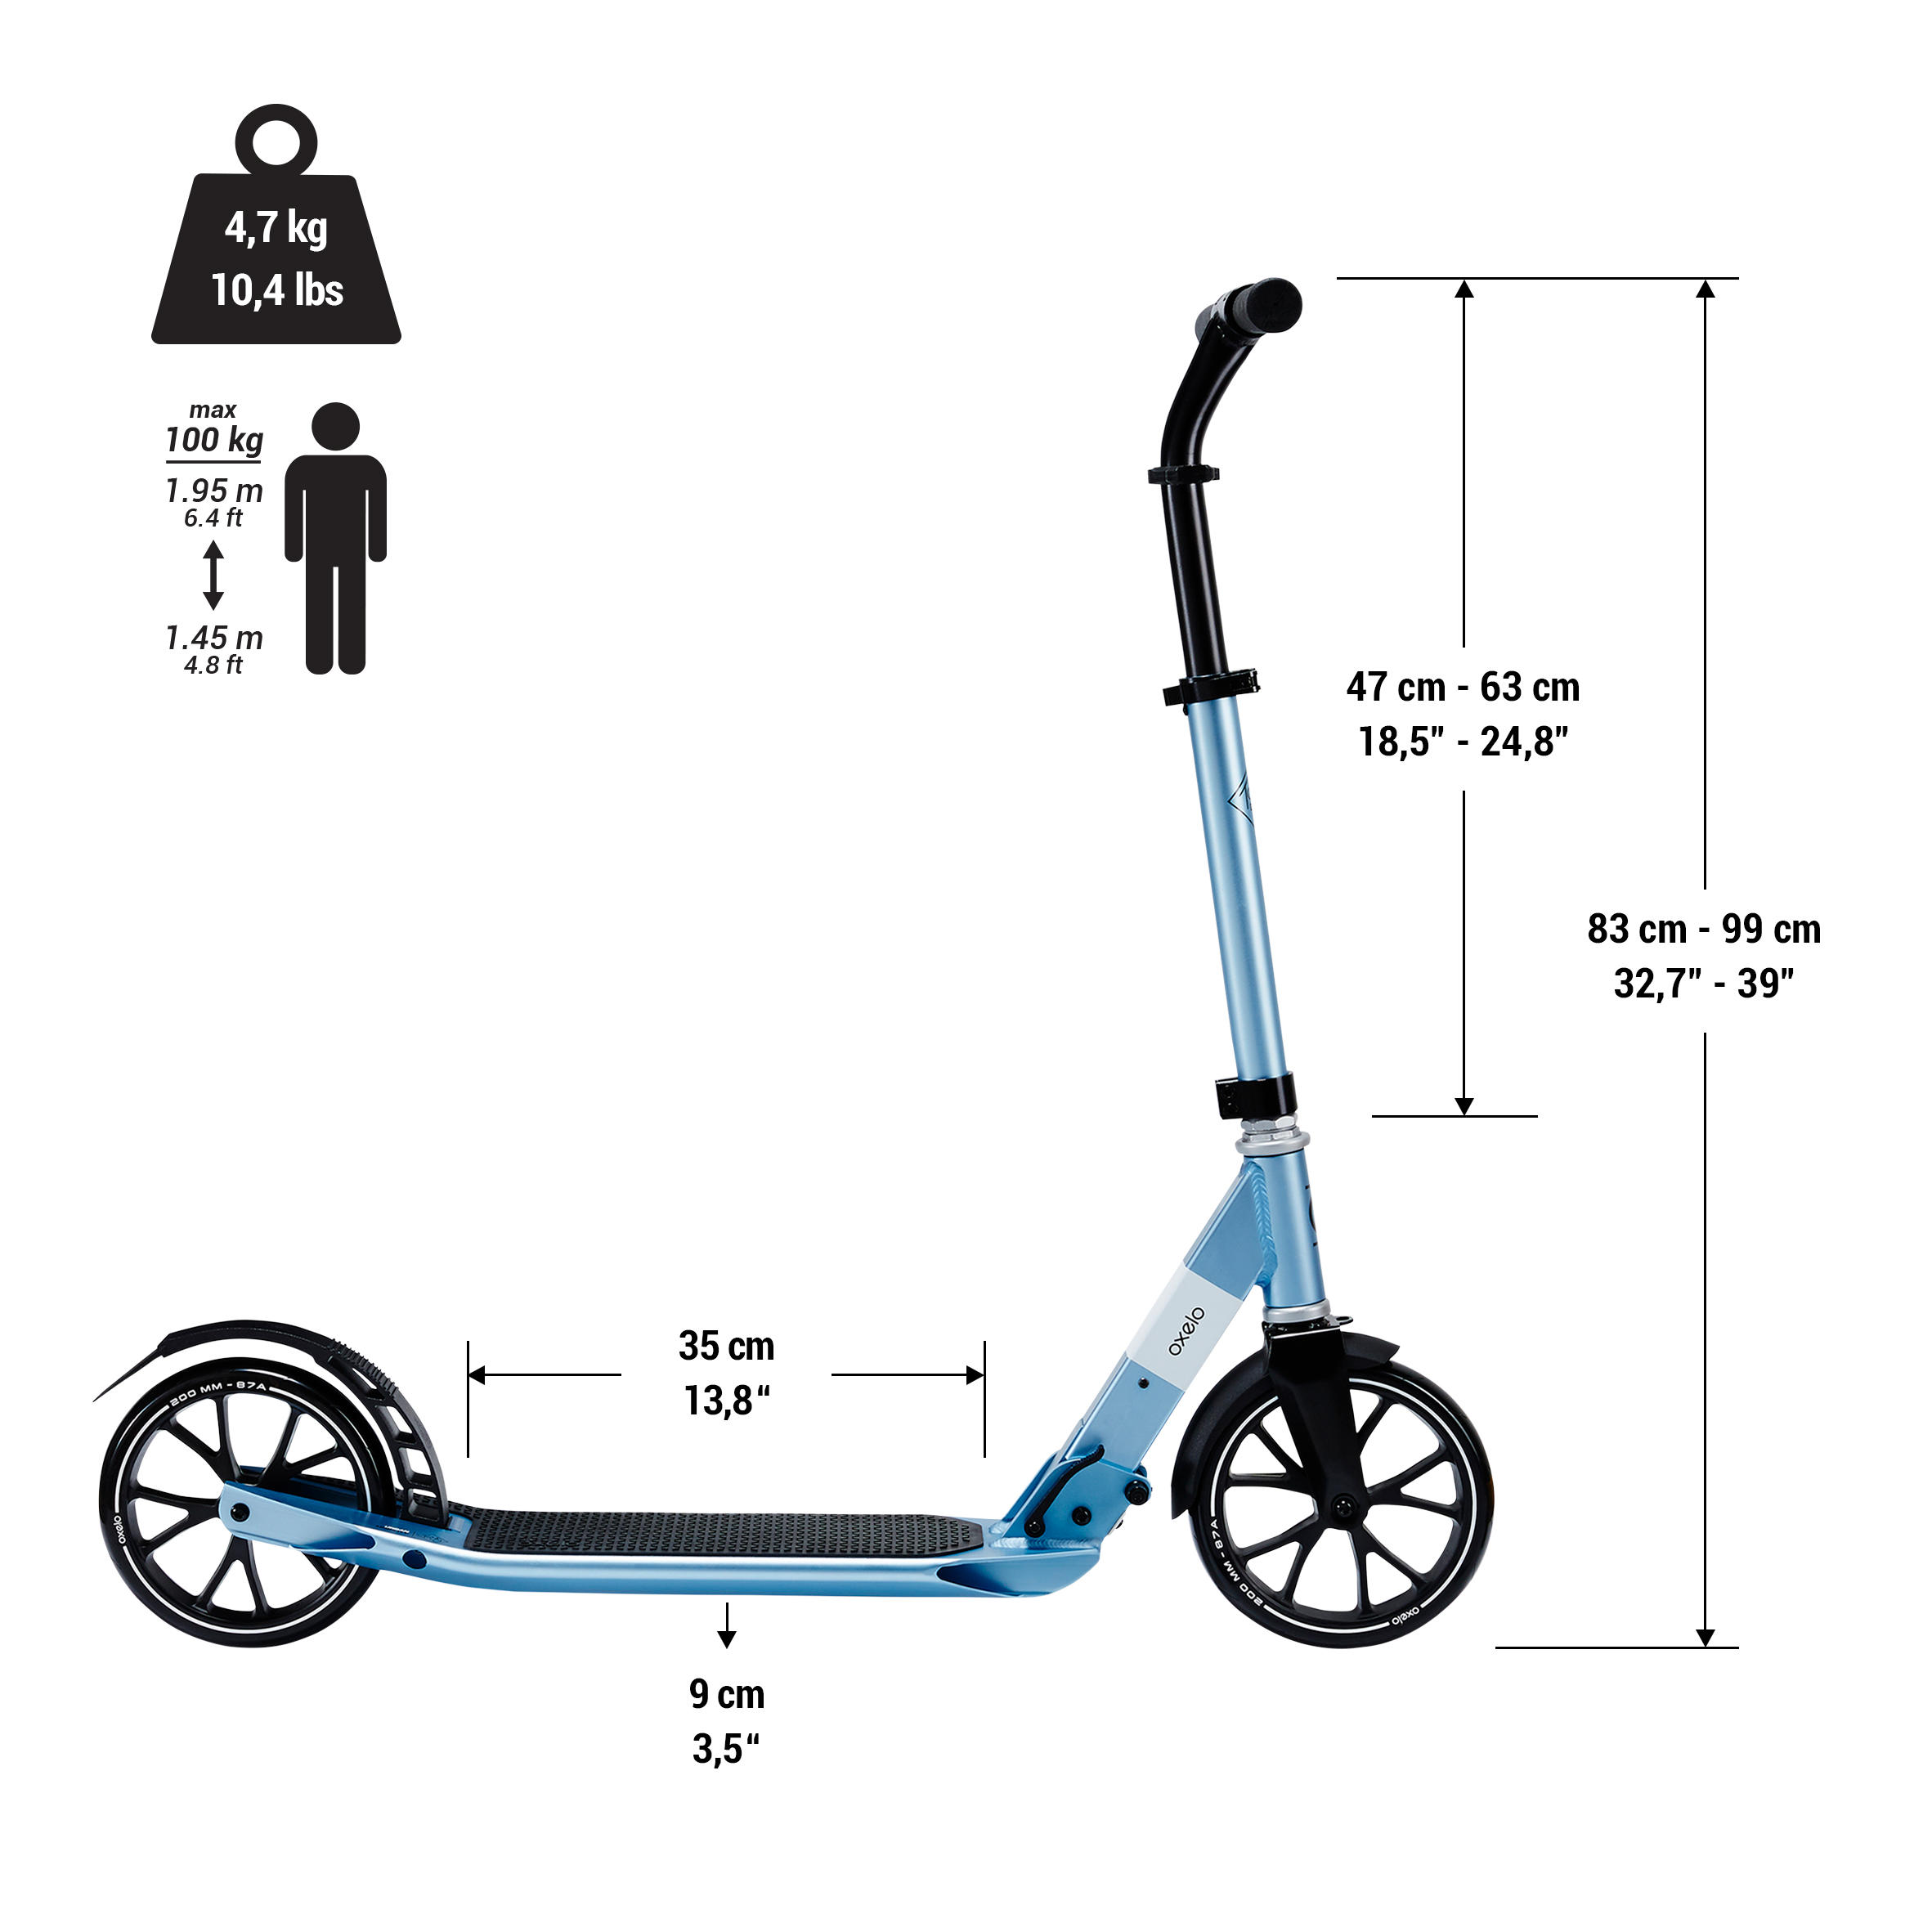 Town 5 XL Adult Scooter - Blue - Decathlon